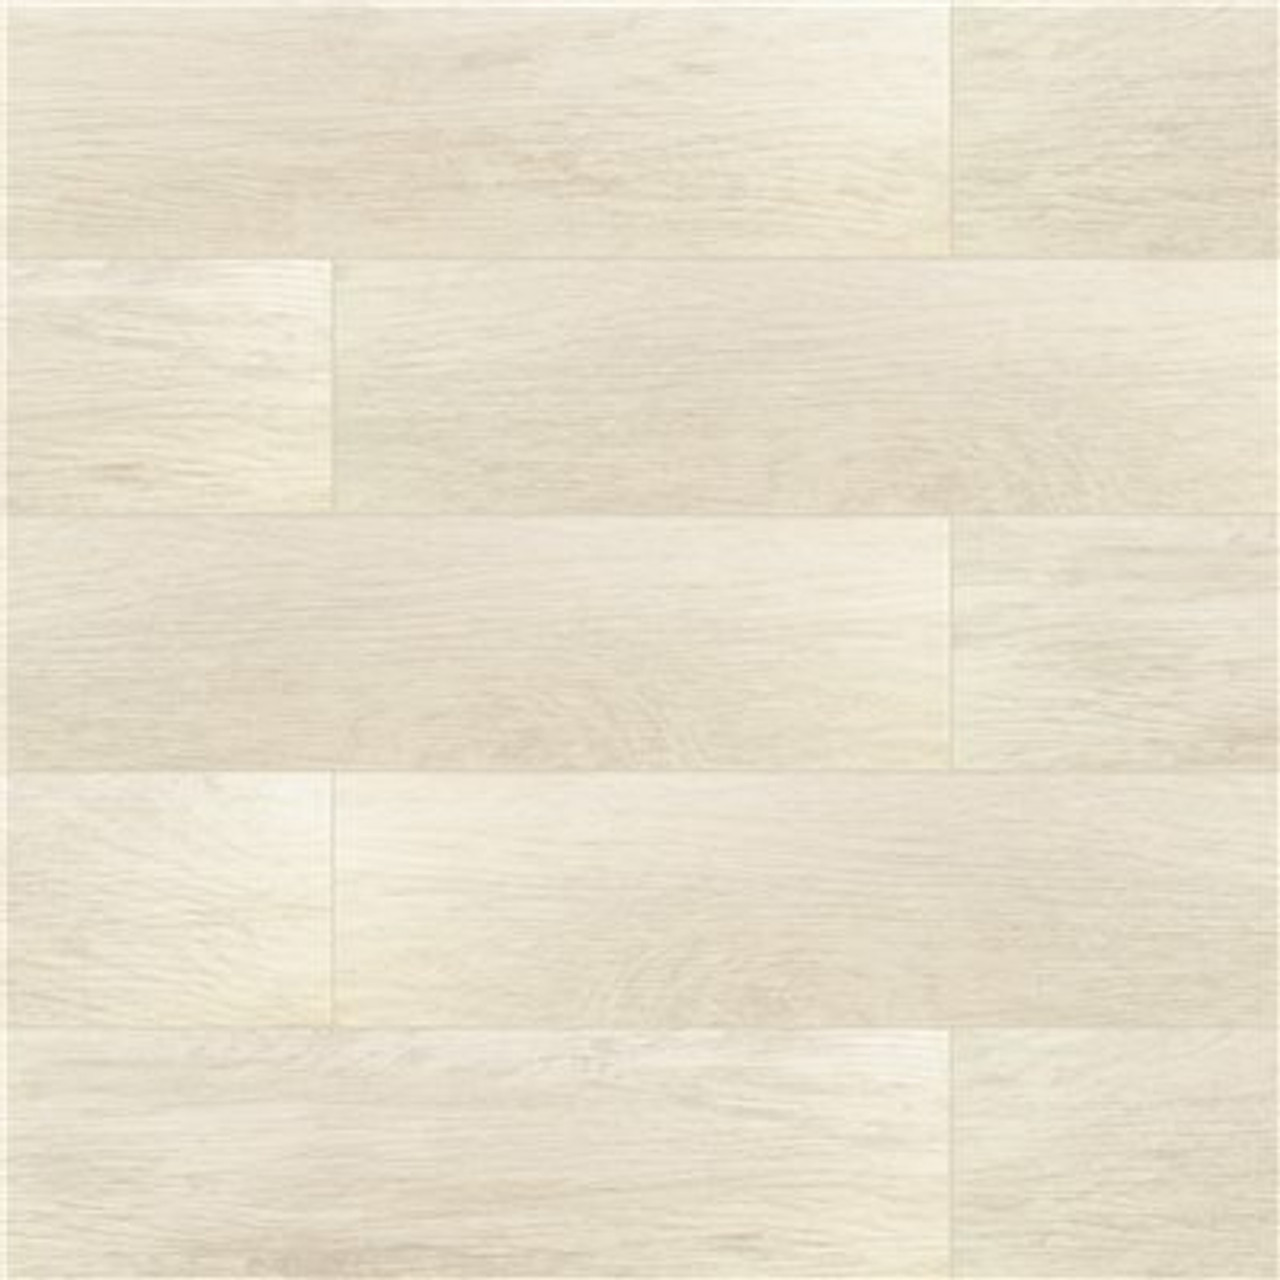 Trafficmaster Capel Bianco 6 In. X 24 In. Matte Ceramic Floor And Wall Tile (17 Sq. Ft./Case)